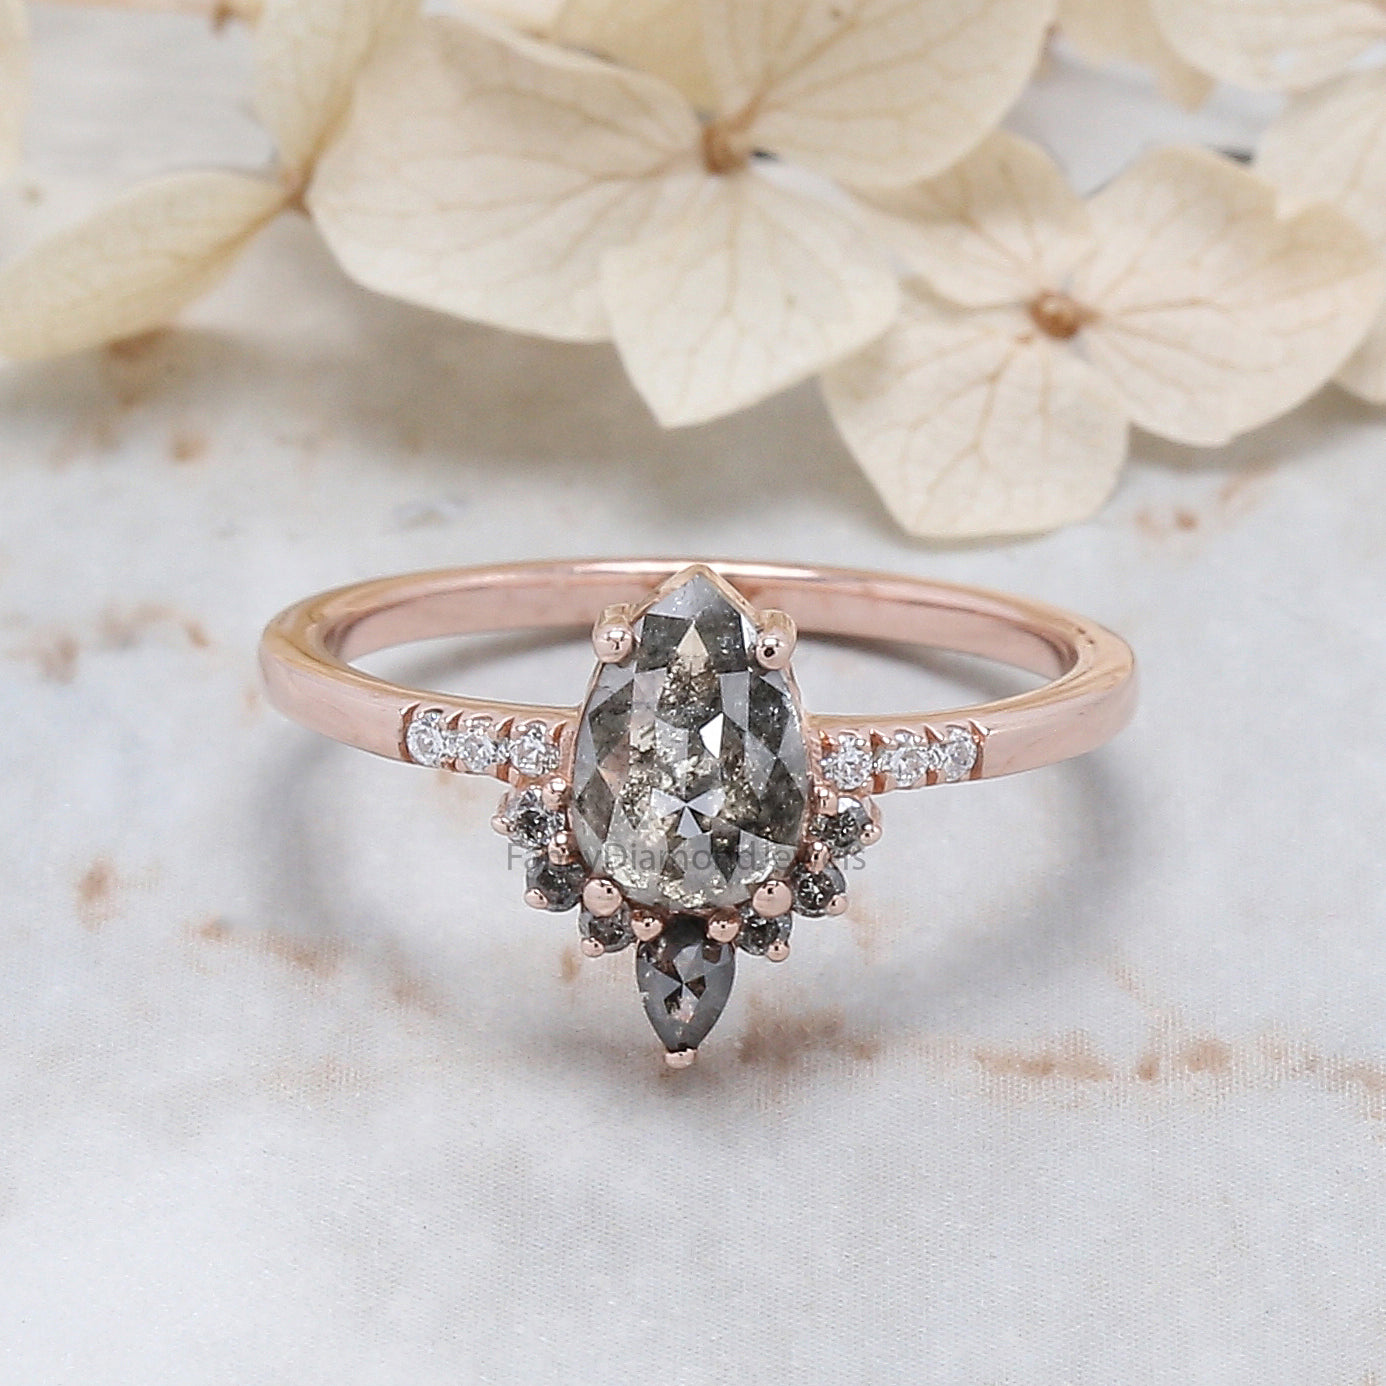 Pear Cut Salt And Pepper Diamond Ring 1.04 Ct 7.53 MM Pear Diamond Ring 14K Solid Rose Gold Silver Pear Engagement Ring Gift For Her QL3063